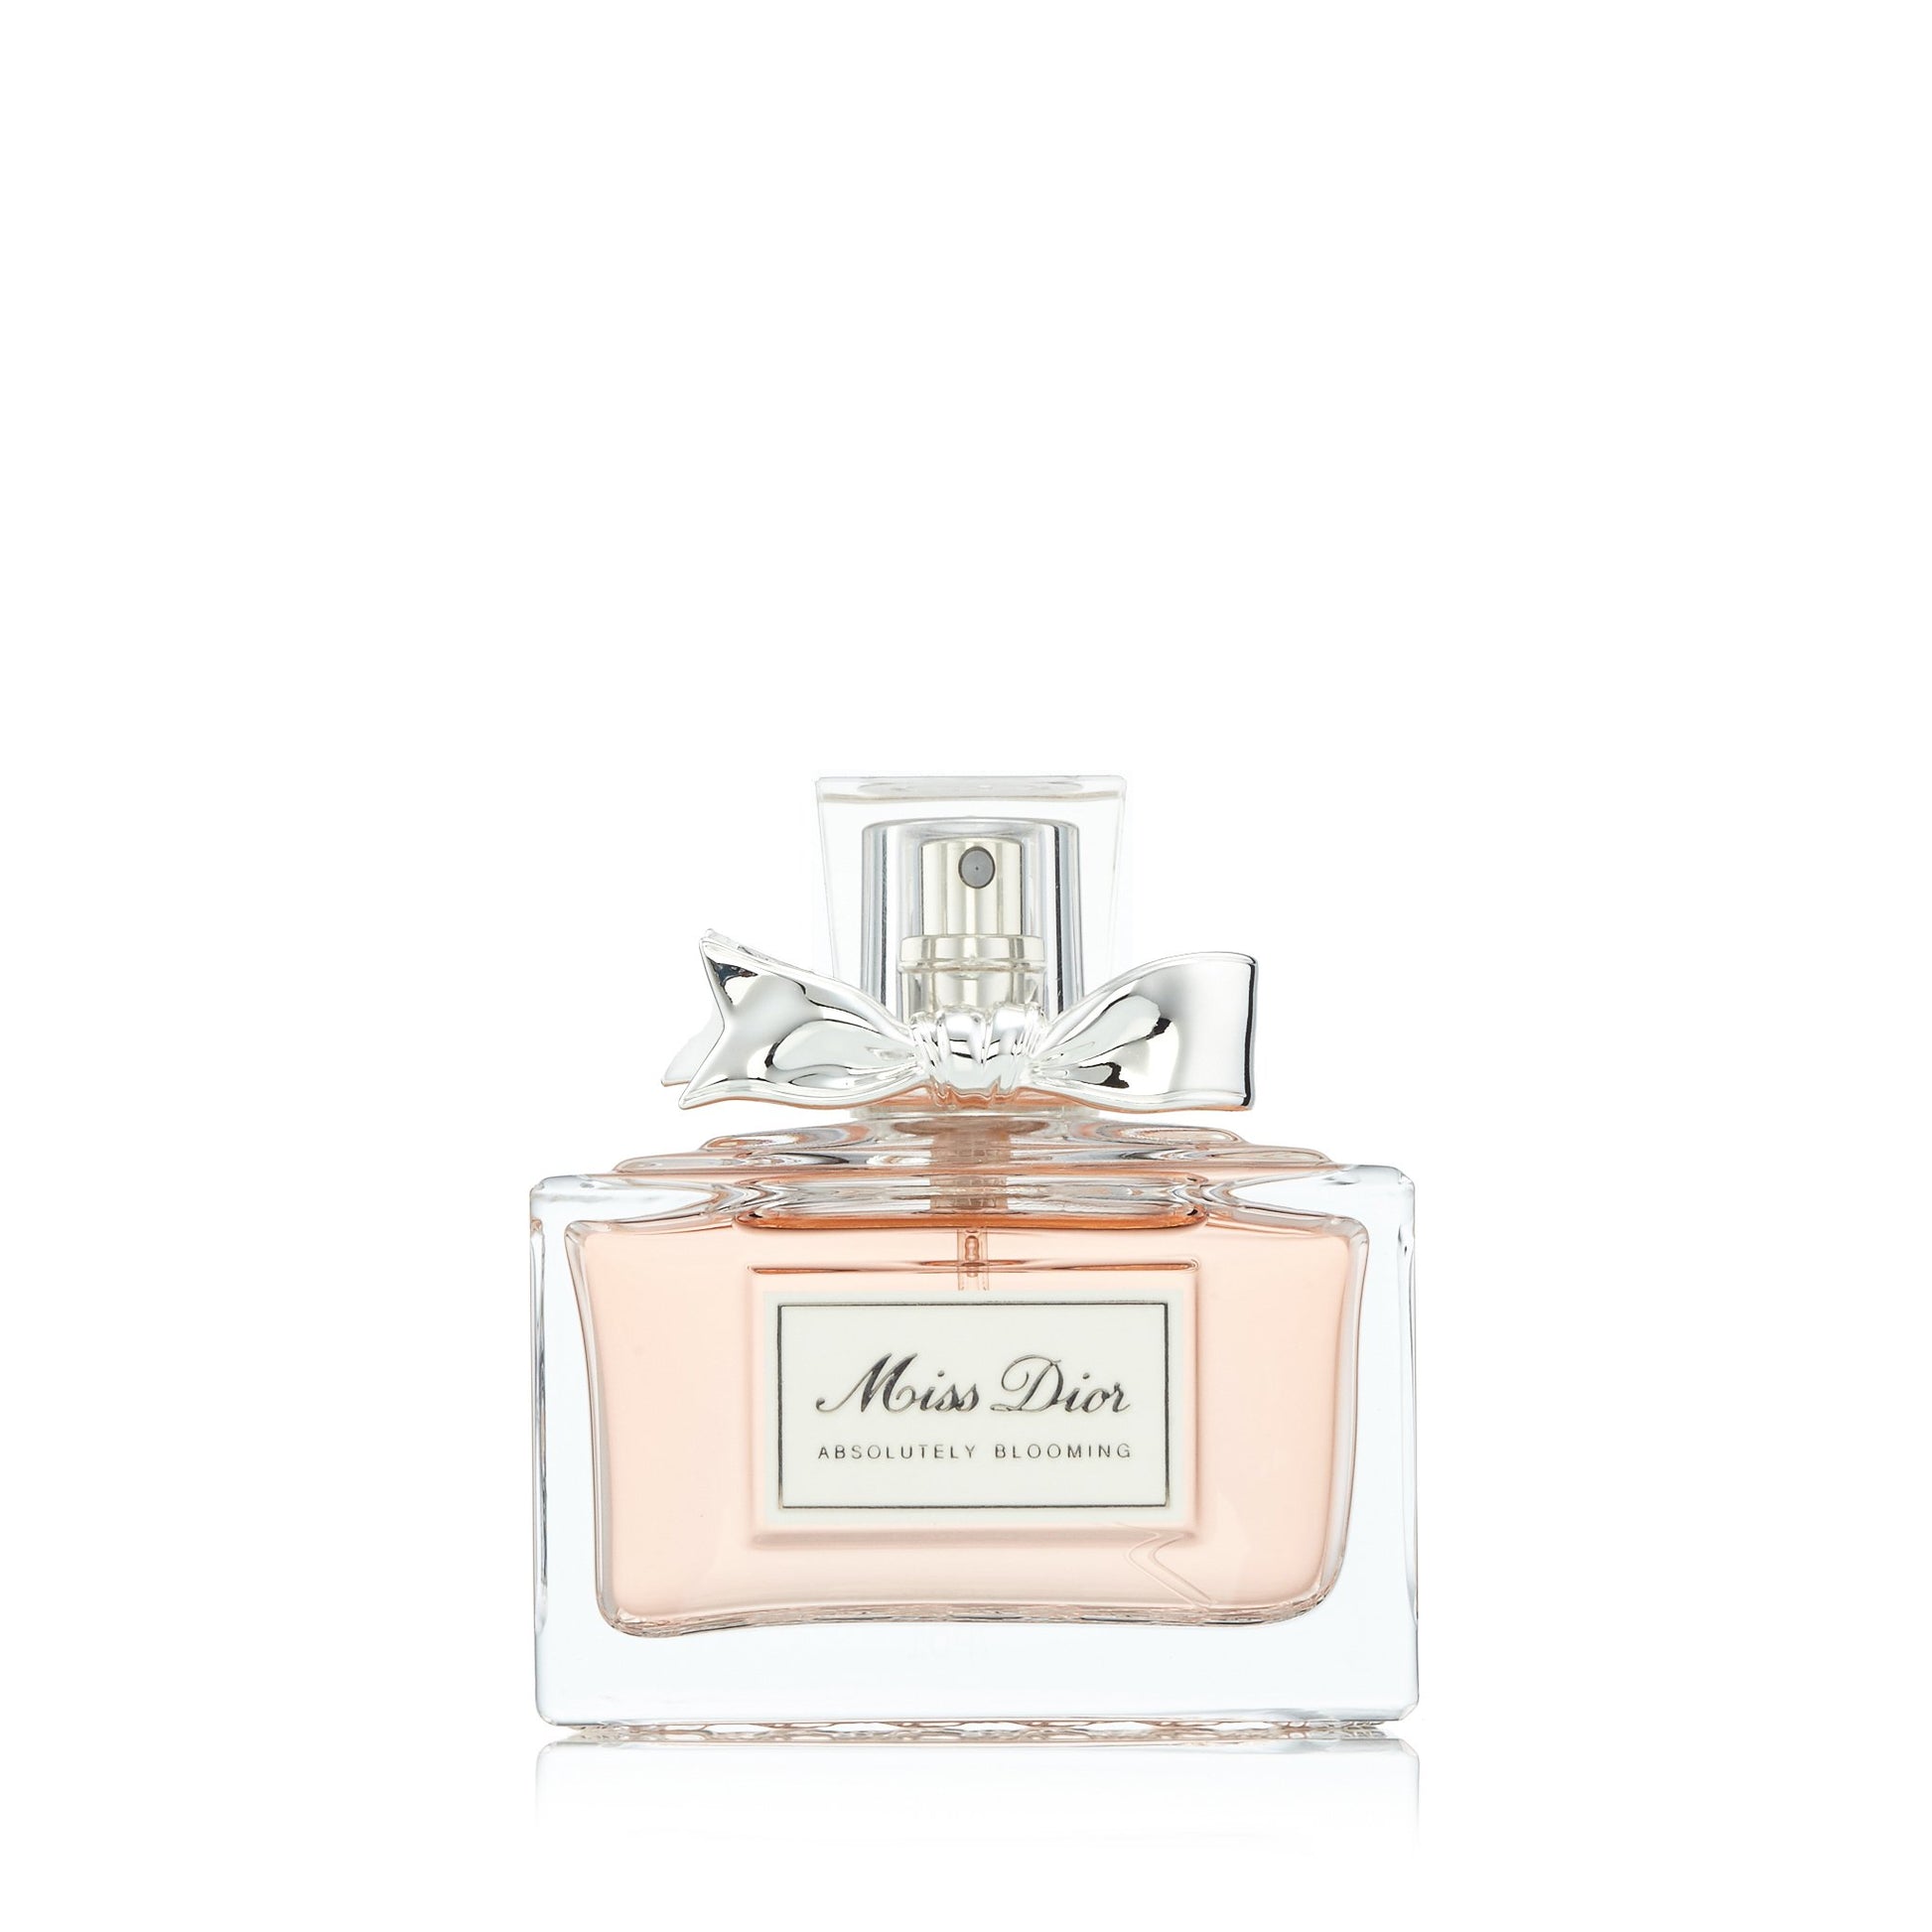 Miss Dior Absolutely Blooming Eau de Parfum Spray for Women by Dior, Product image 2